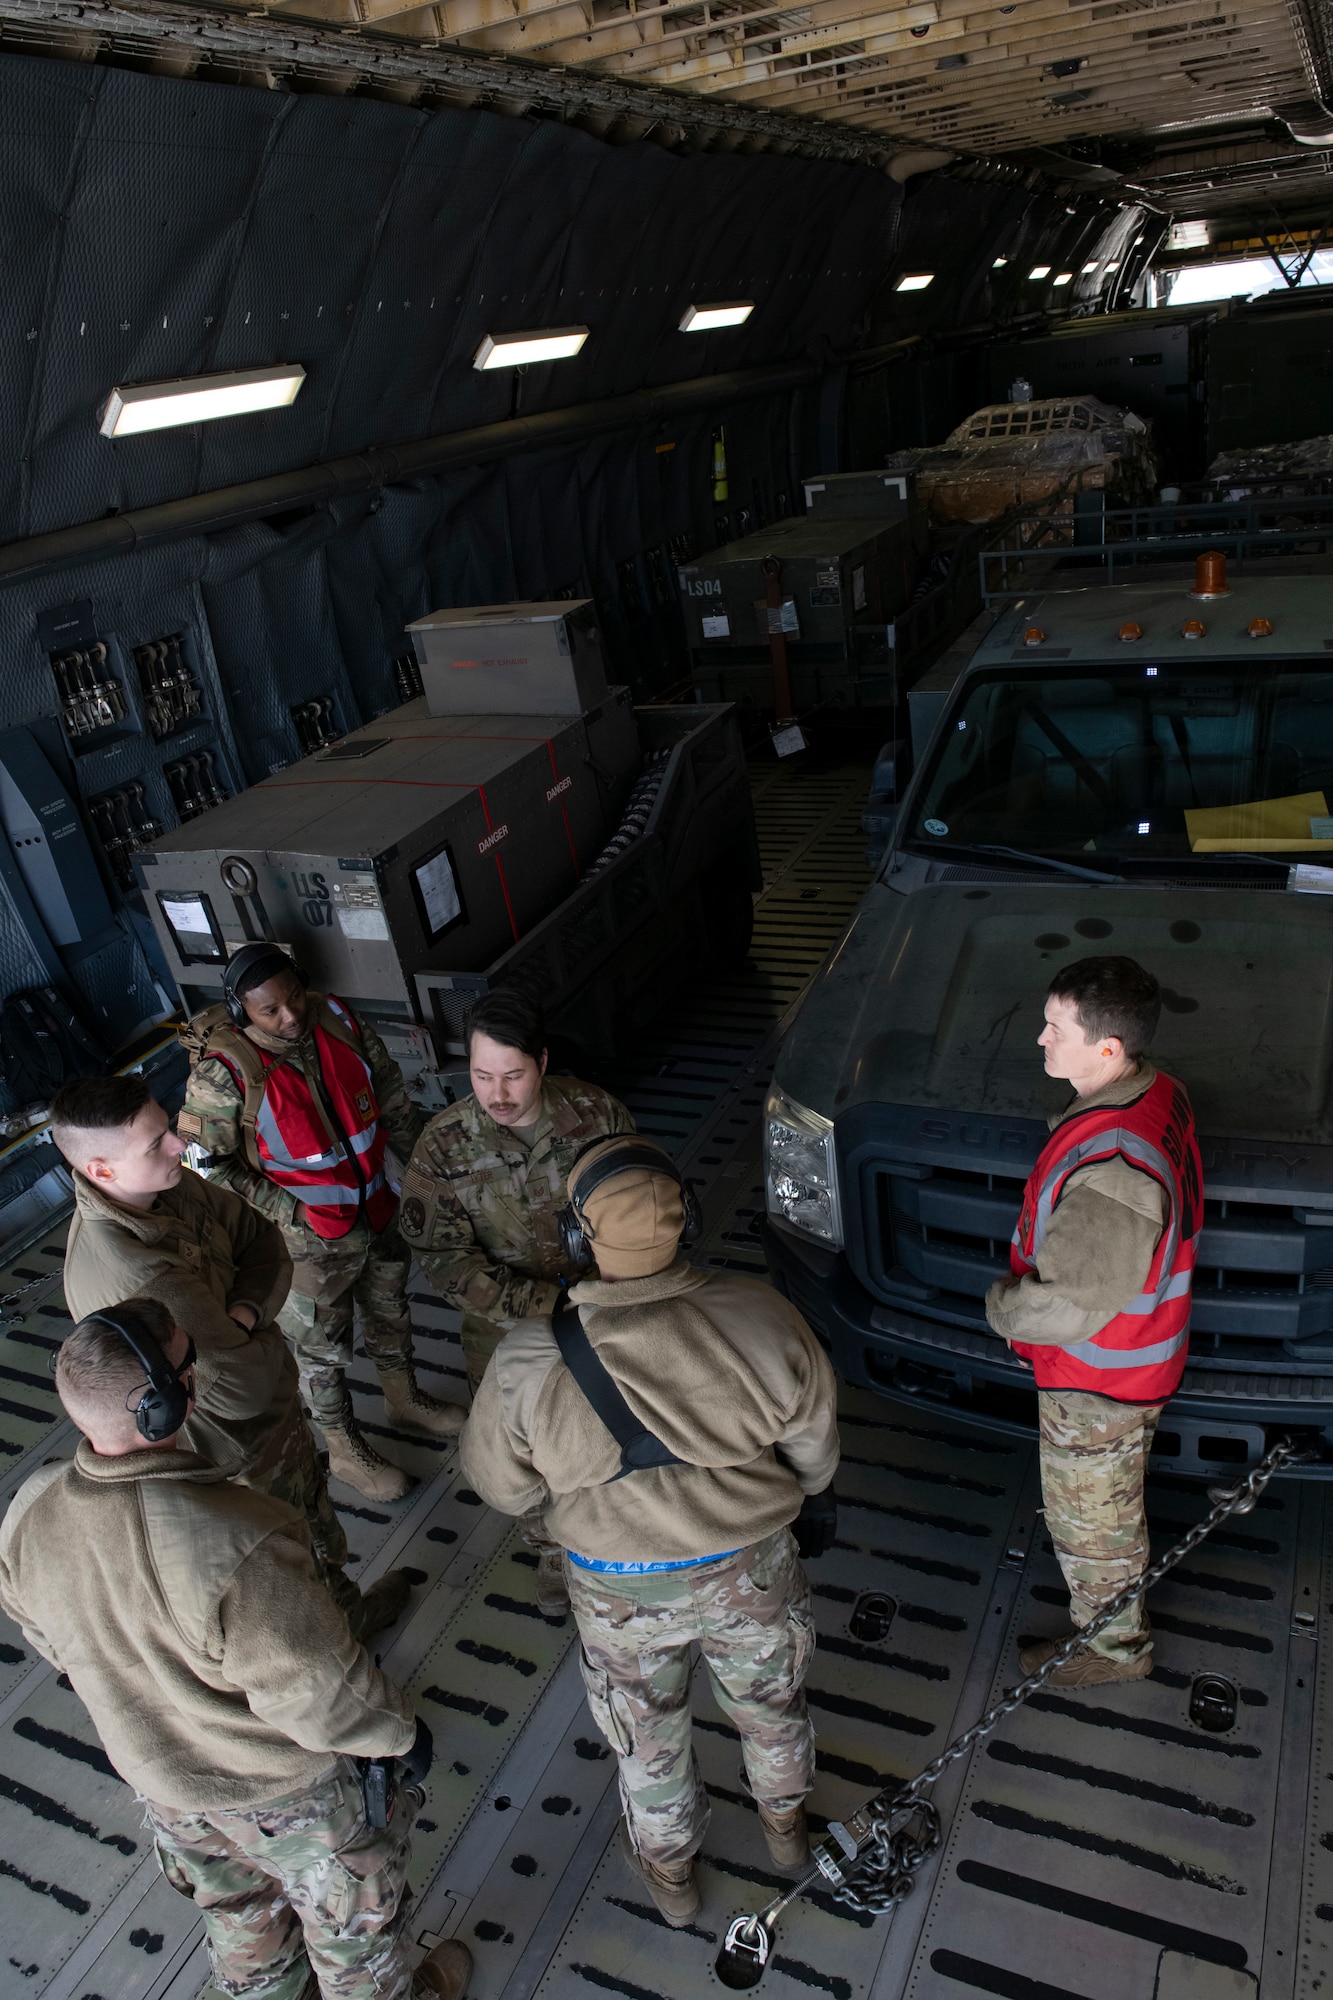 U.S. Airmen from the 60th Aerial Port Squadron out of Travis Air Force Base, California, discuss off-loading plans in a C-5M Super Galaxy cargo compartment in preparation for Exercise Roundel Perun 22-01 at the Alpena Combat Readiness Training Center, Alpena, Michigan, April 10, 2022. A group of six Airmen are standing in the front portion of the cargo compartment and compartment is filled with equipment.